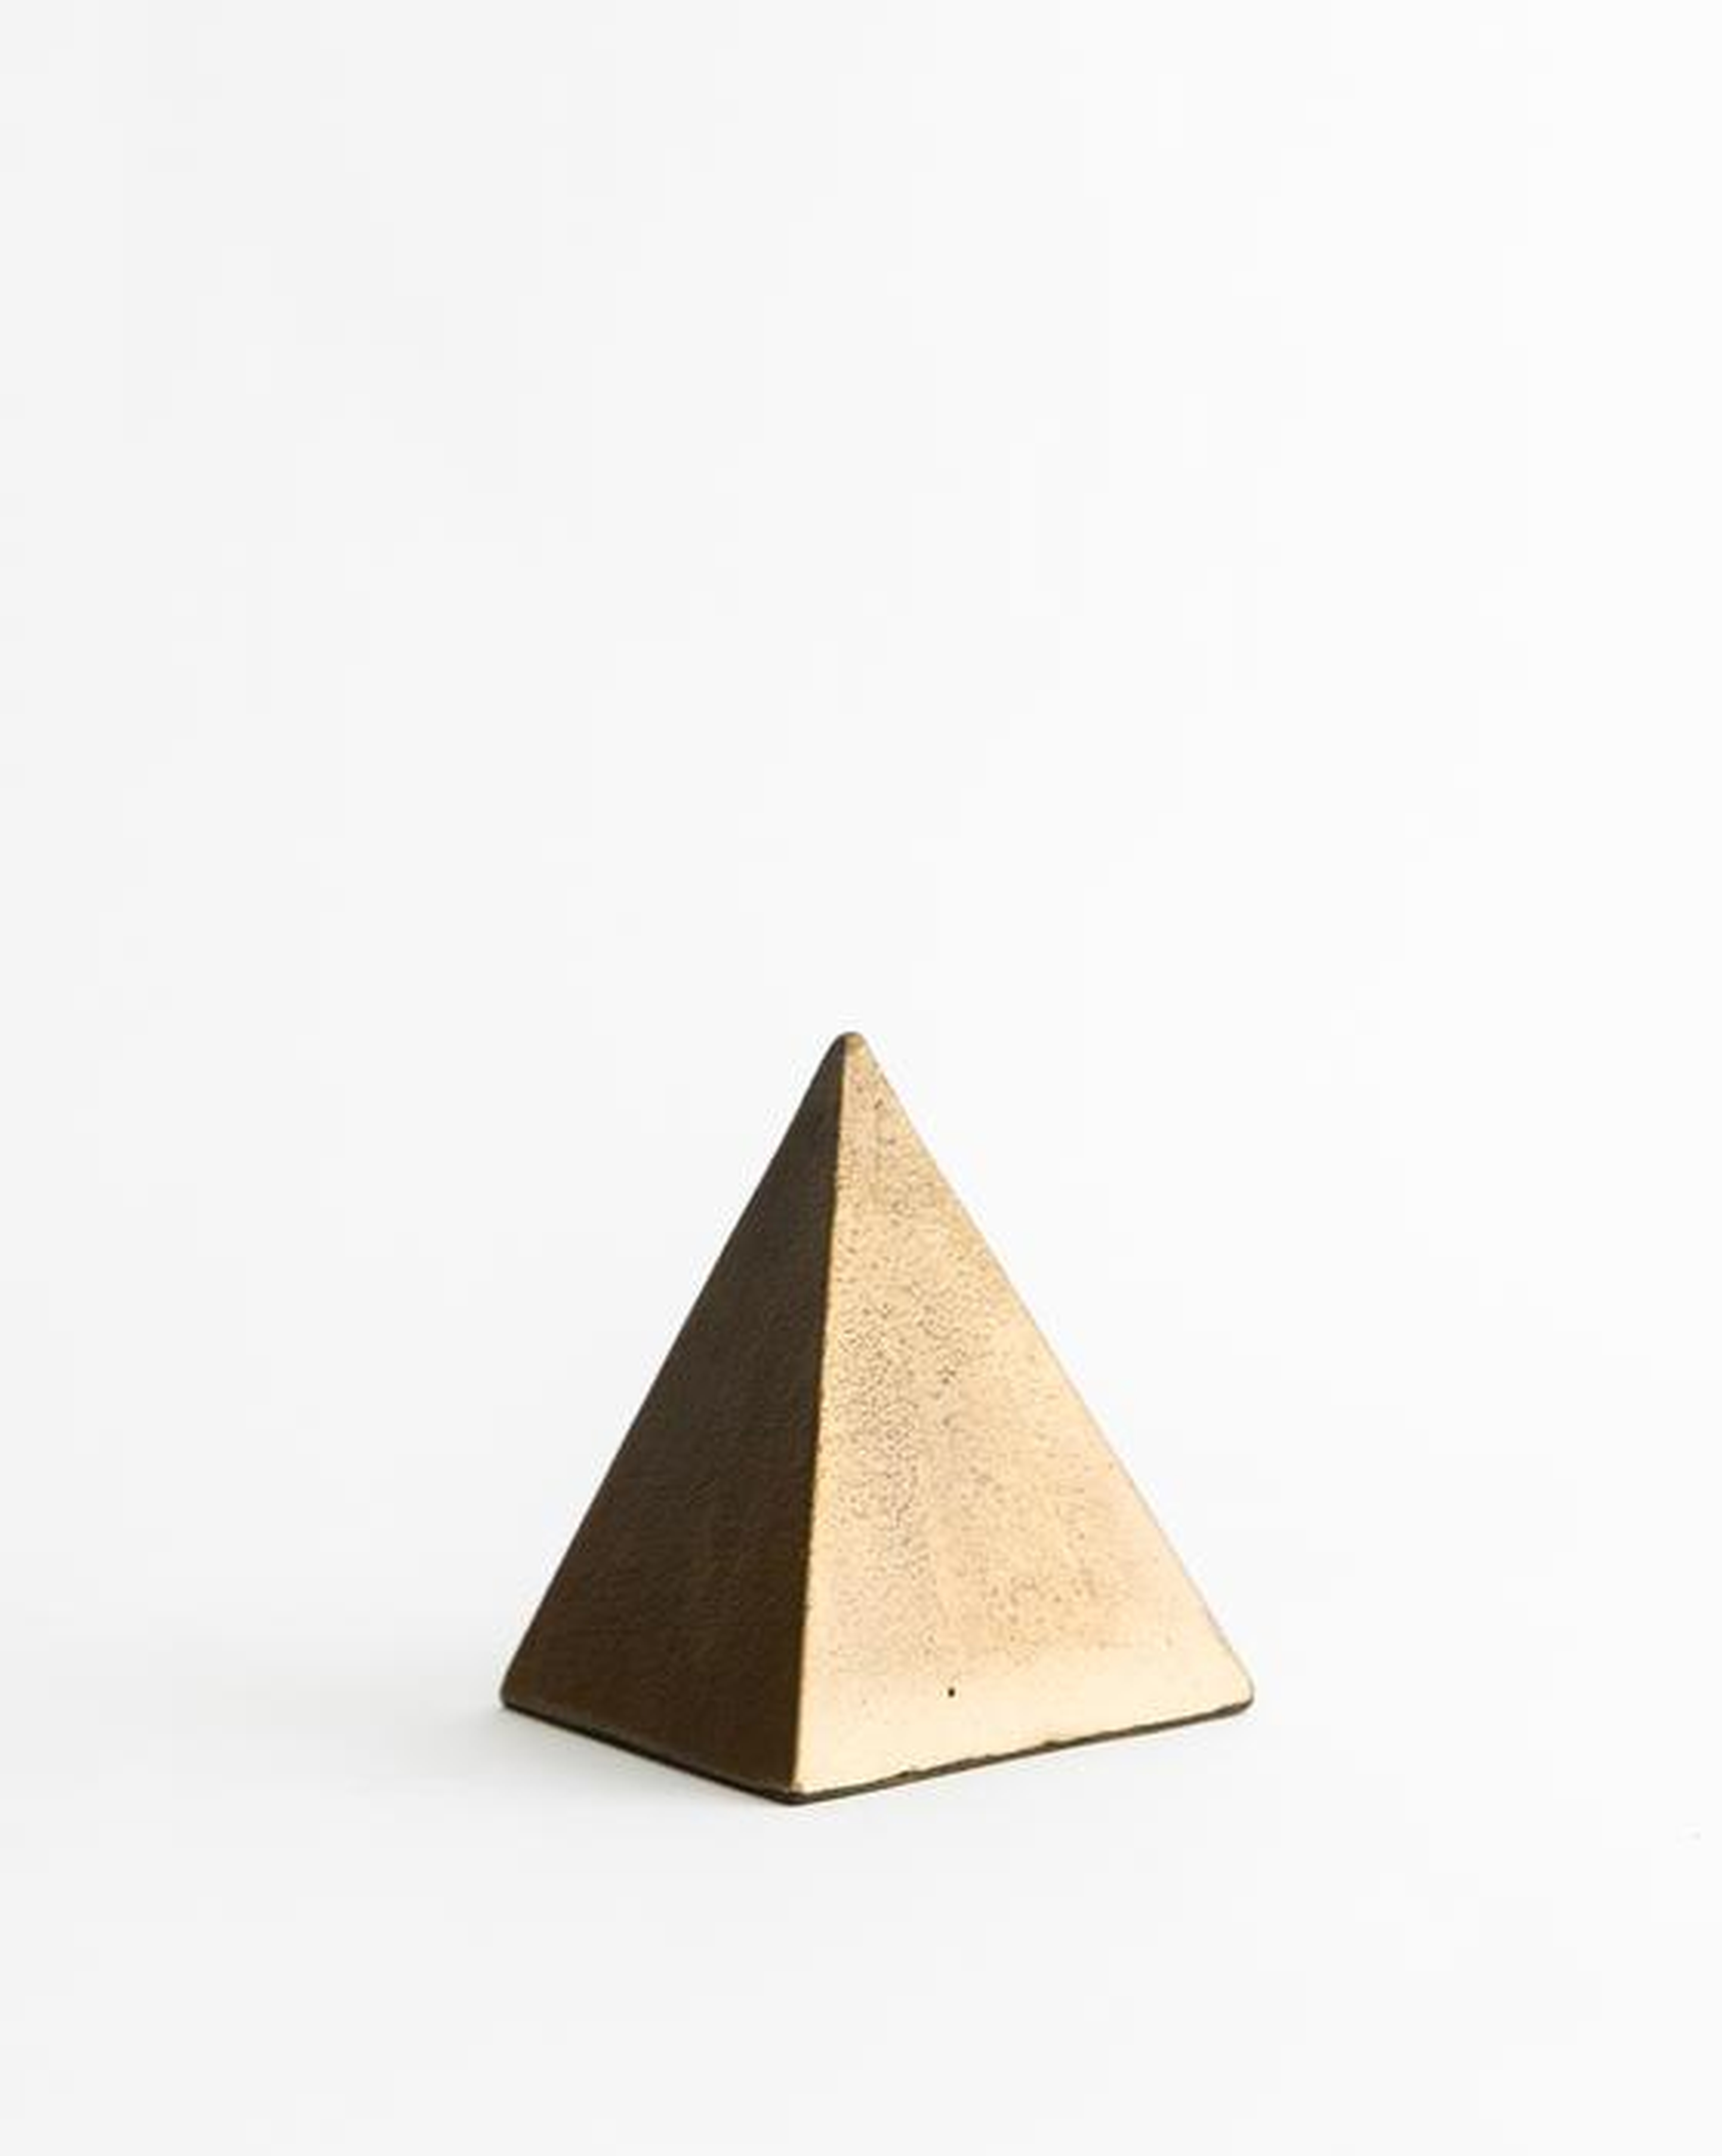 Aged Brass Pyramid, Small - McGee & Co.